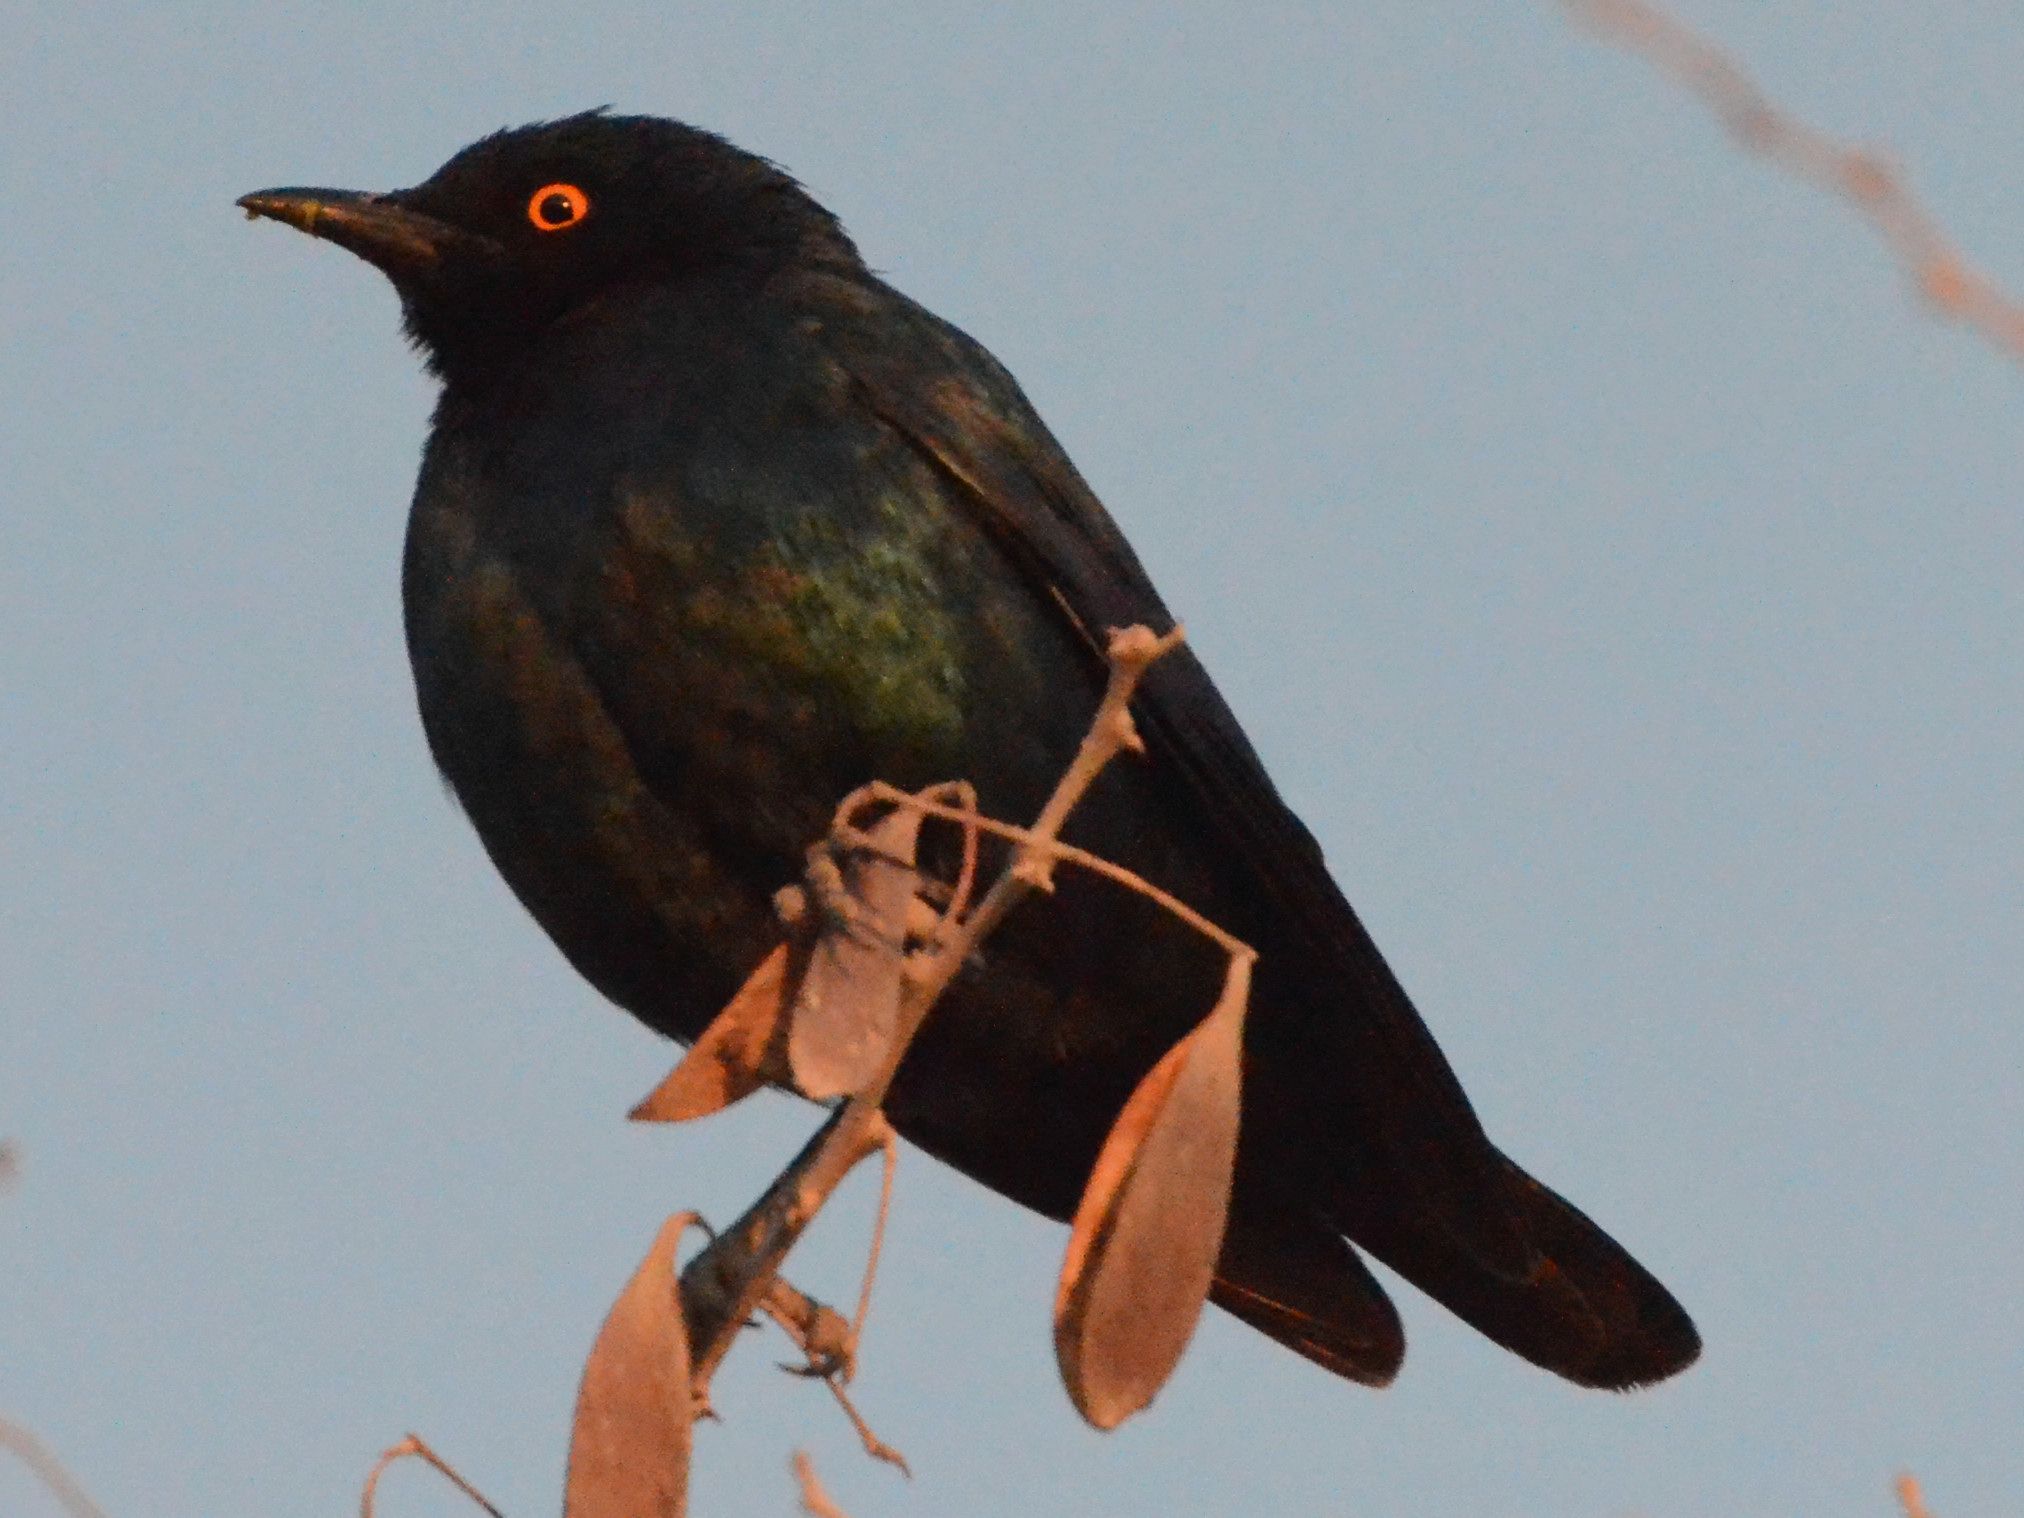 Click picture to see more Pale-winged Starlings.